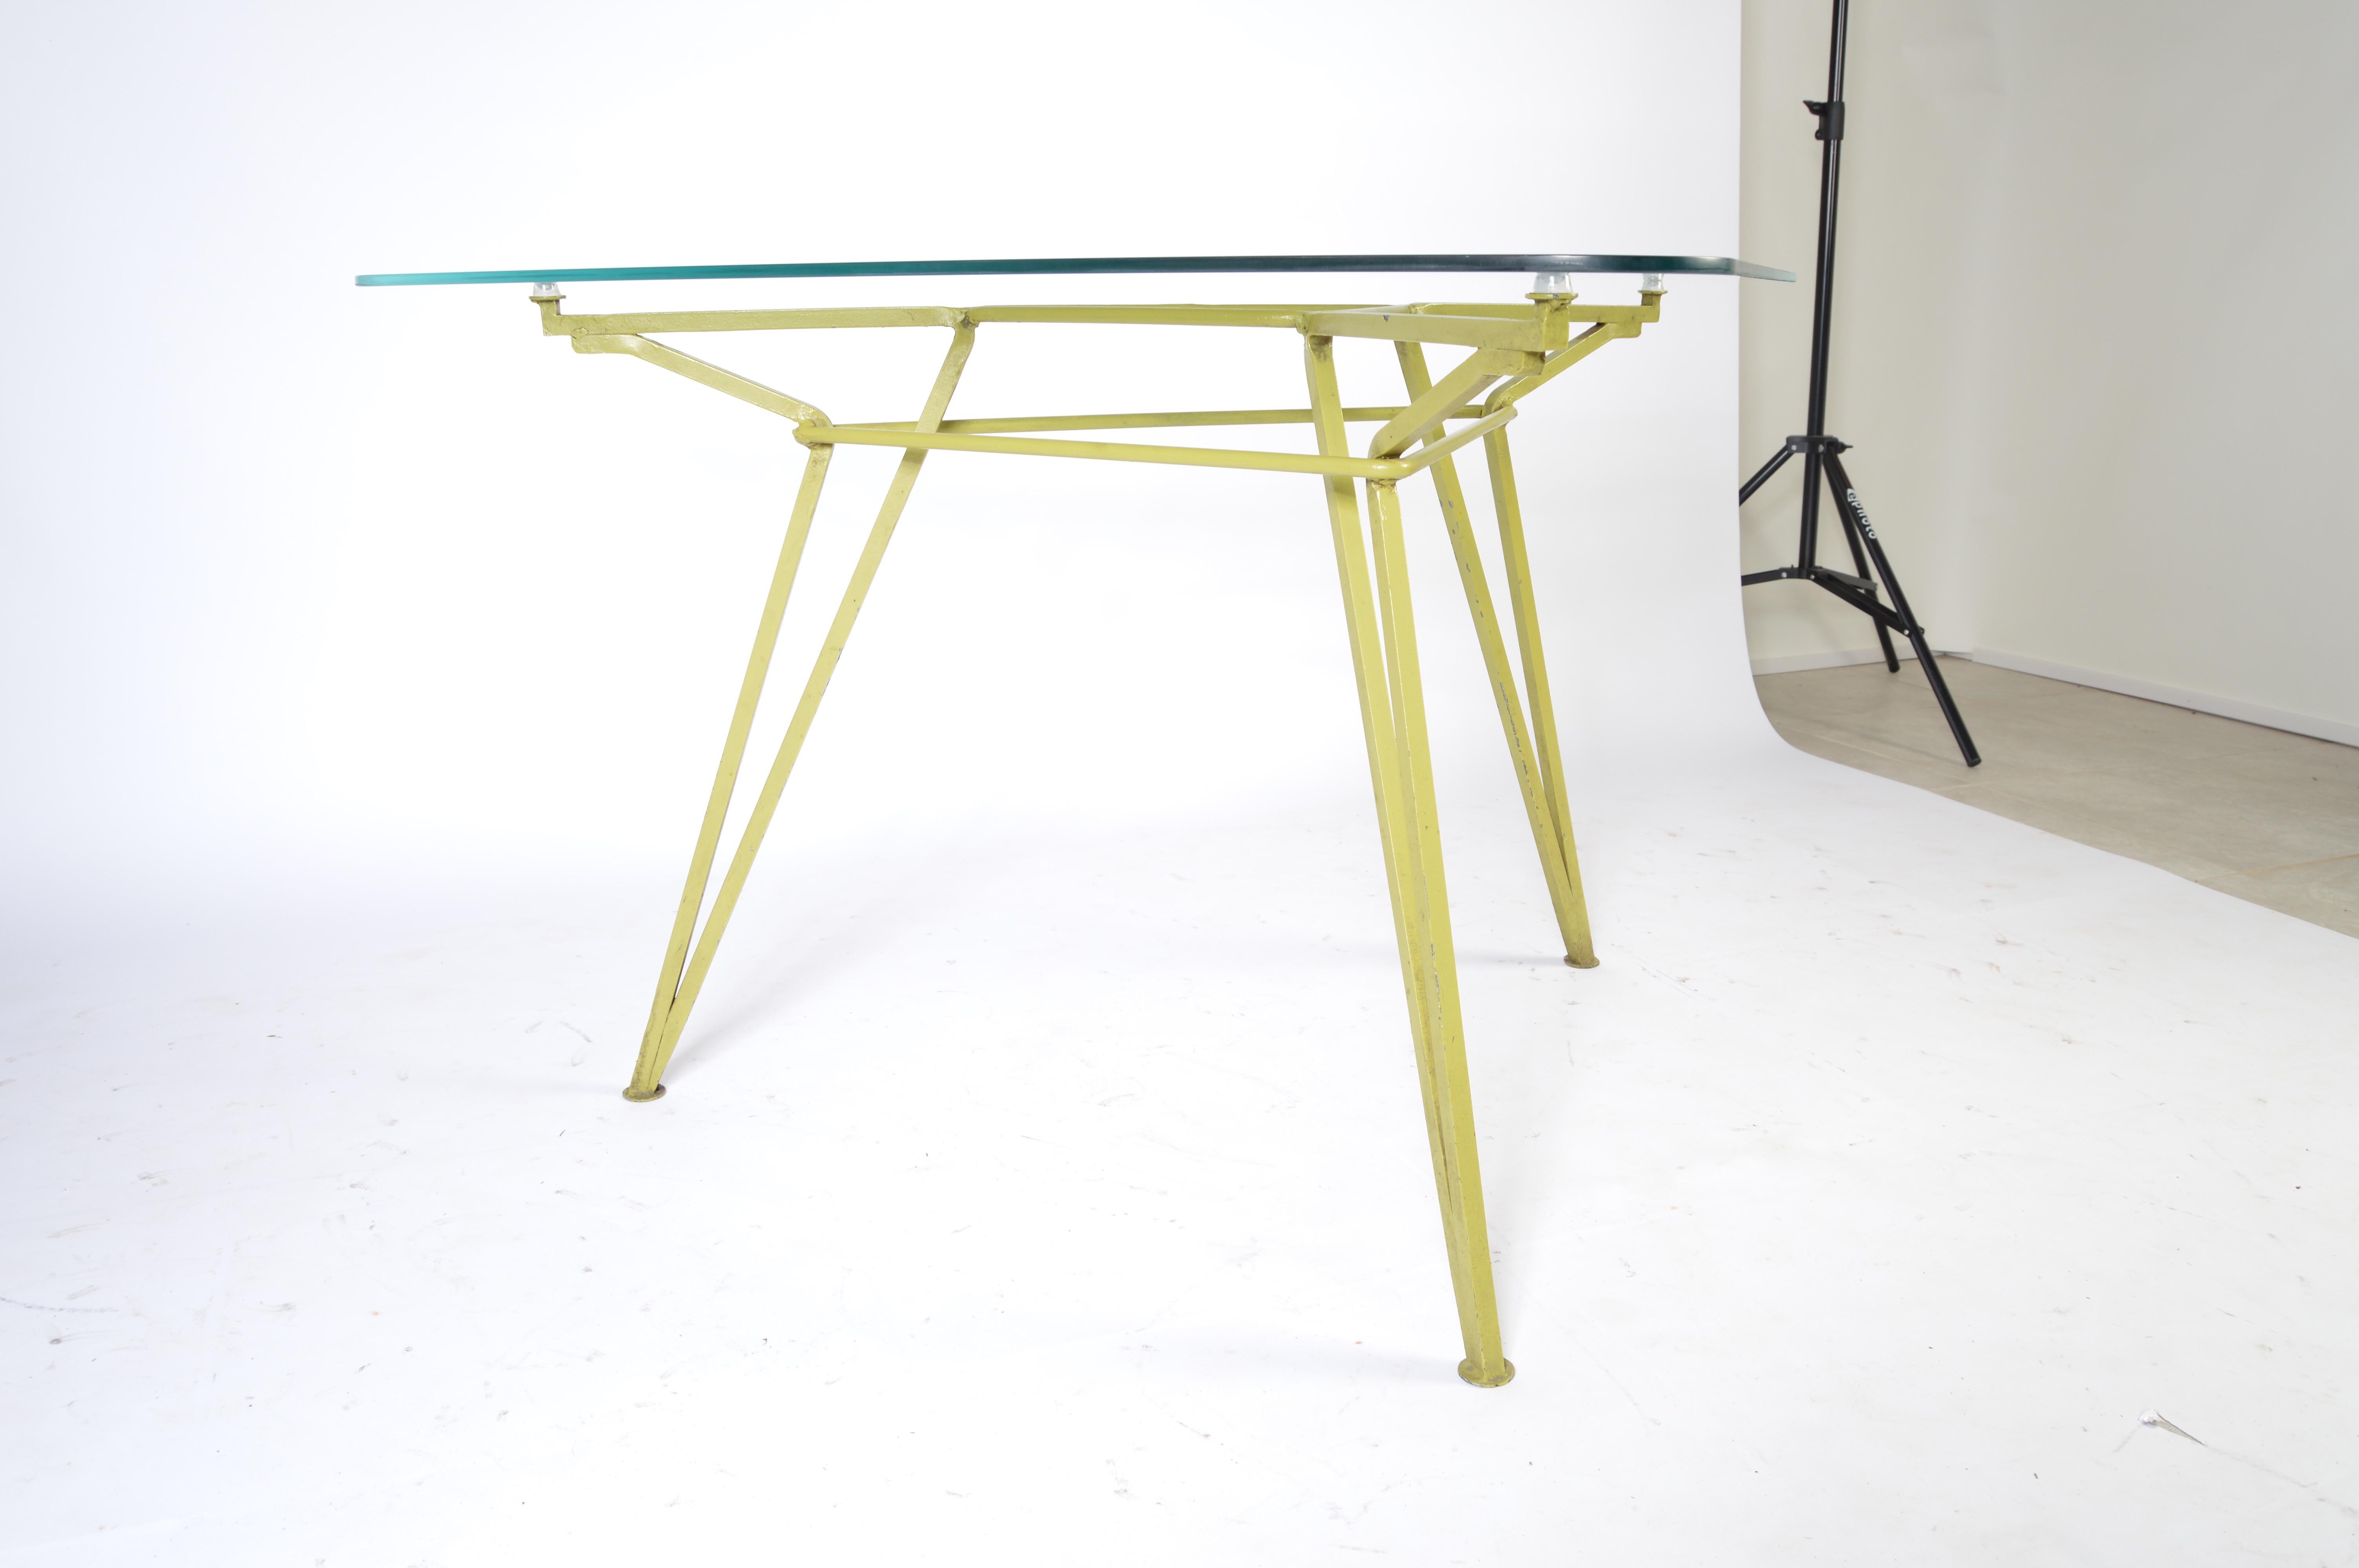 Geometrically shaped triangular iron table with glass top by Maurizio Tempestini. A stunning achievement in sculptural design, circa 1955.